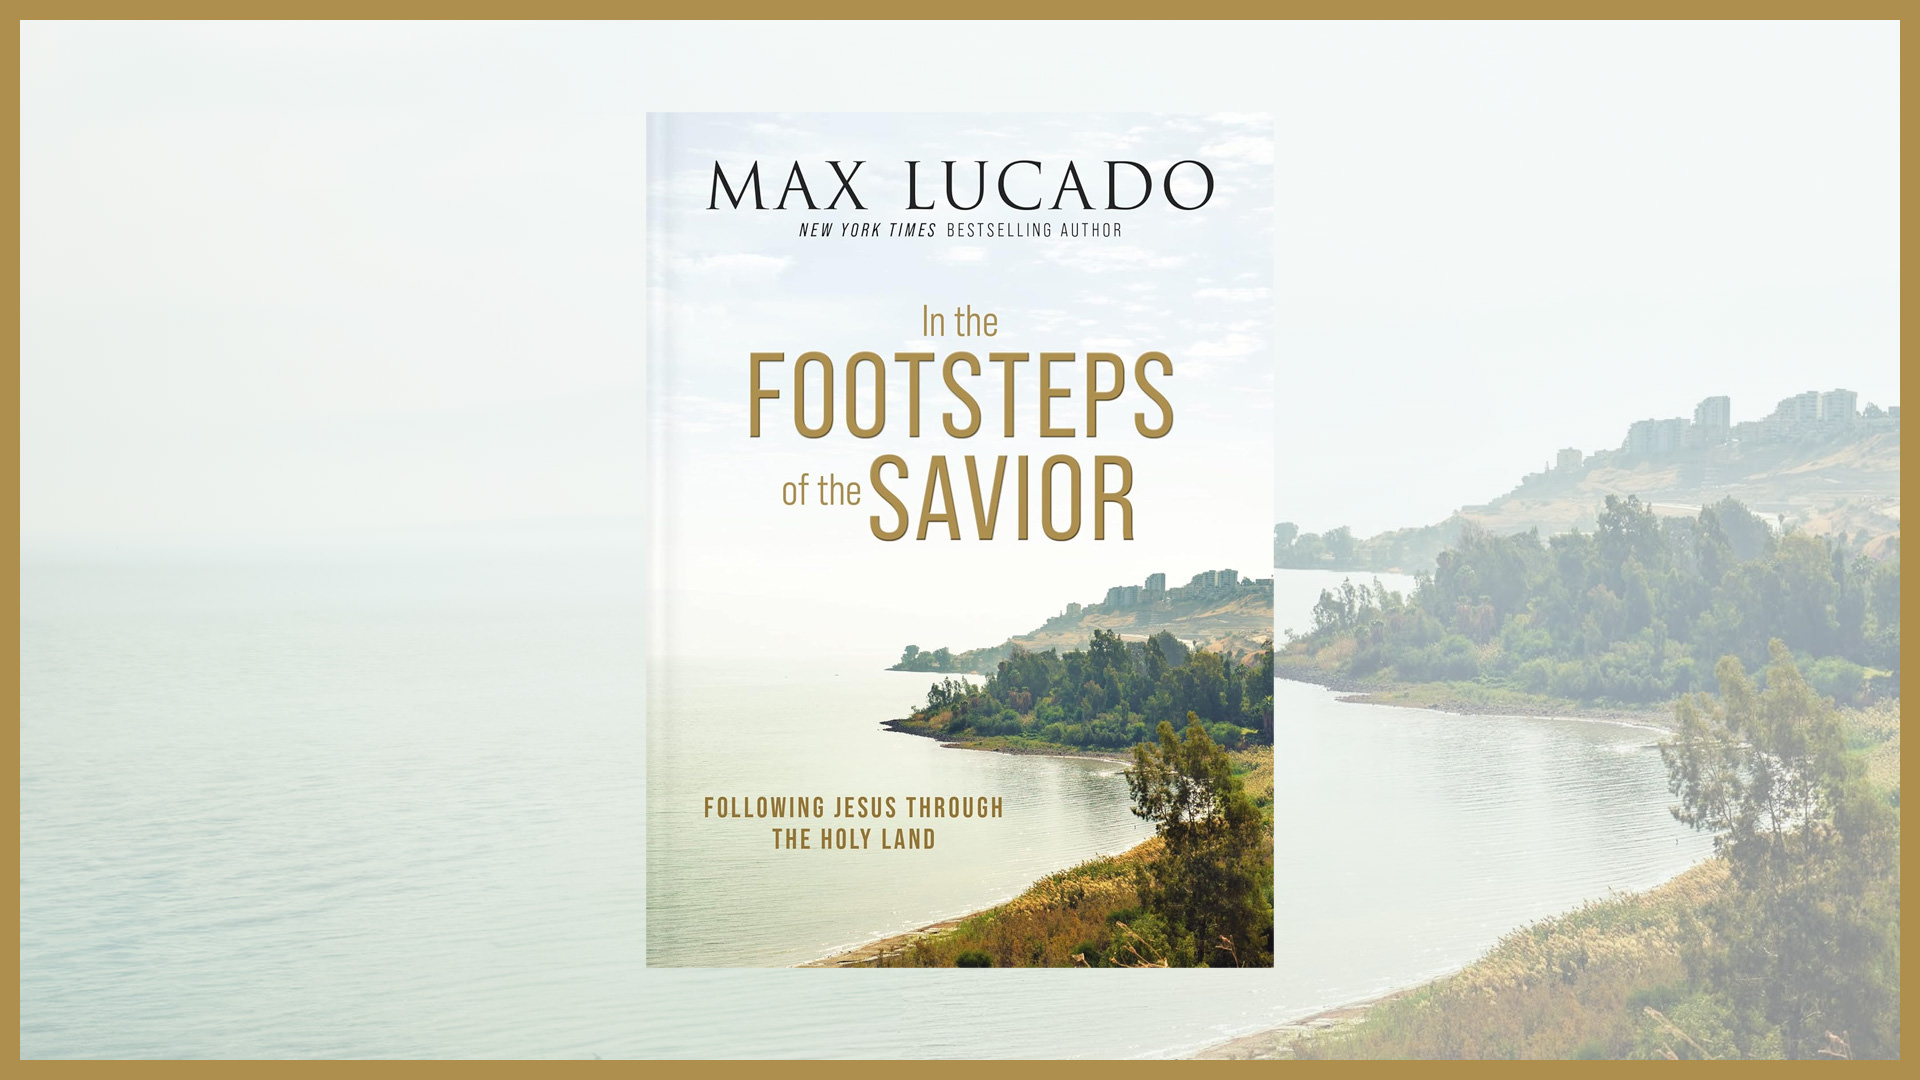 IN THE FOOTSTEPS OF THE SAVIOR